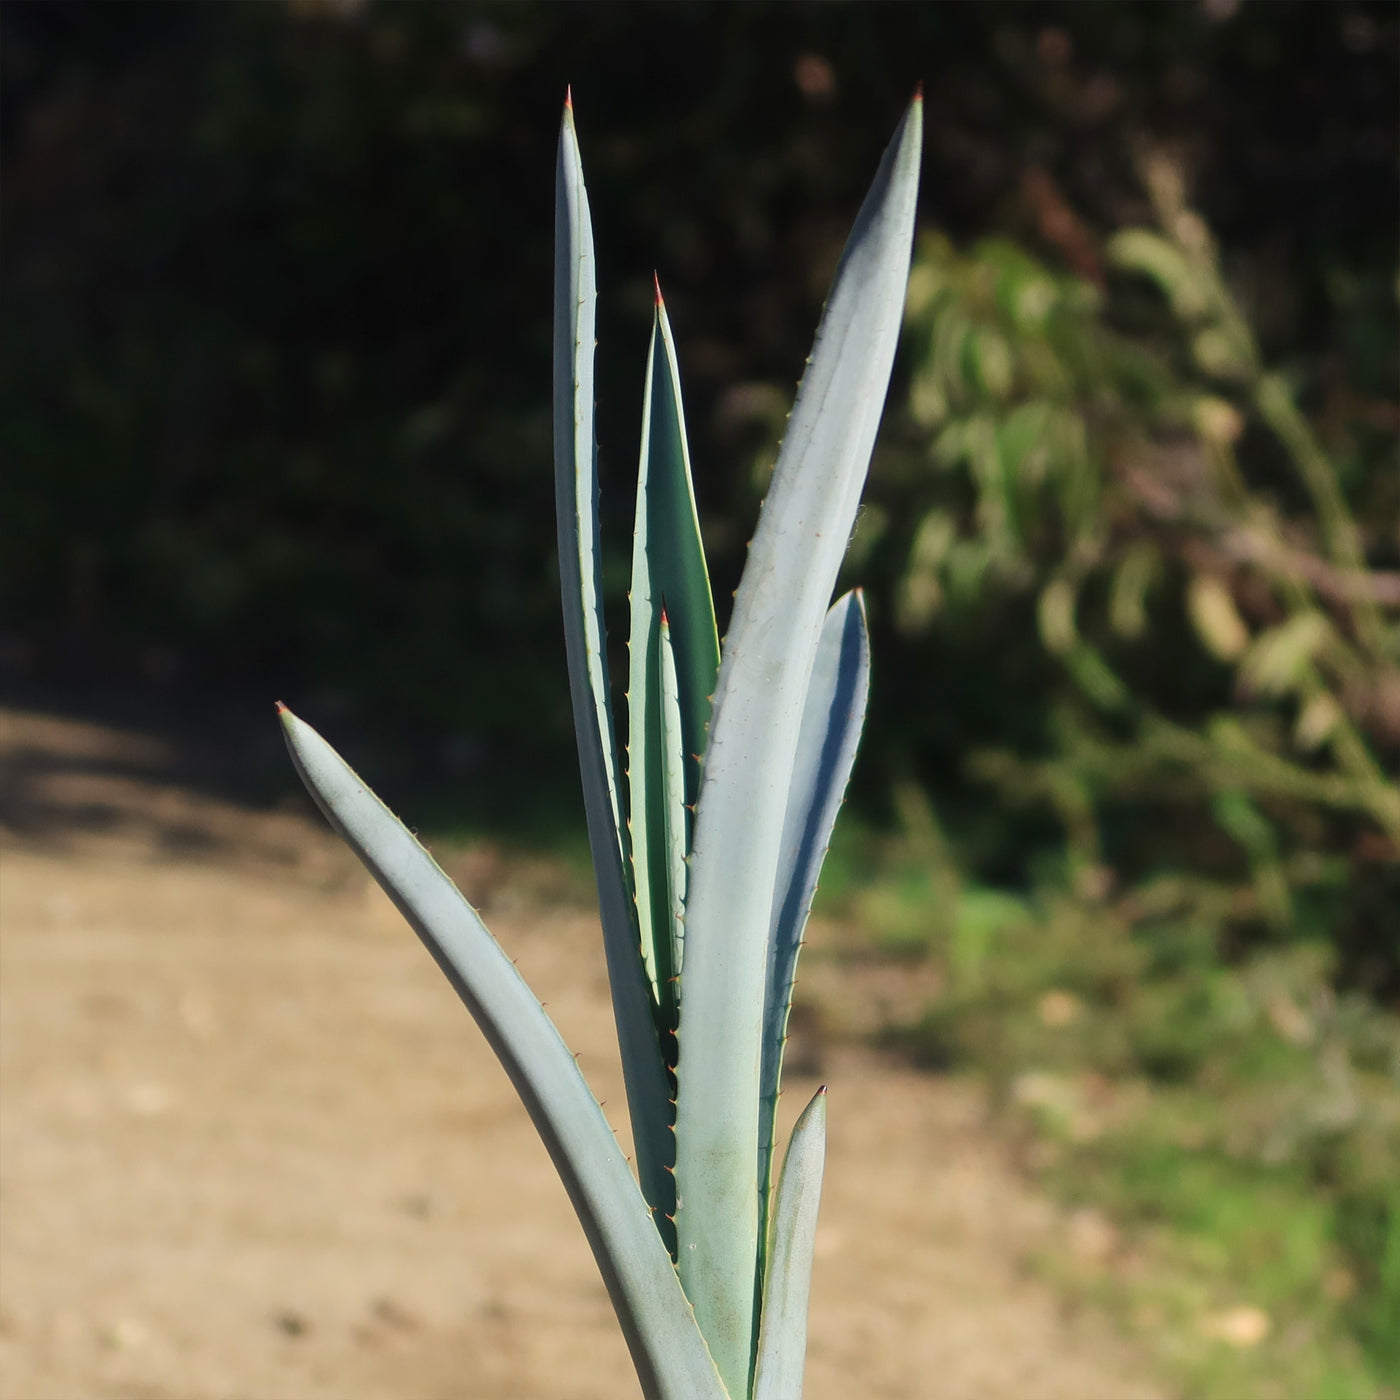 Blue agave - Agave Tequilana 'Tequila Plant'